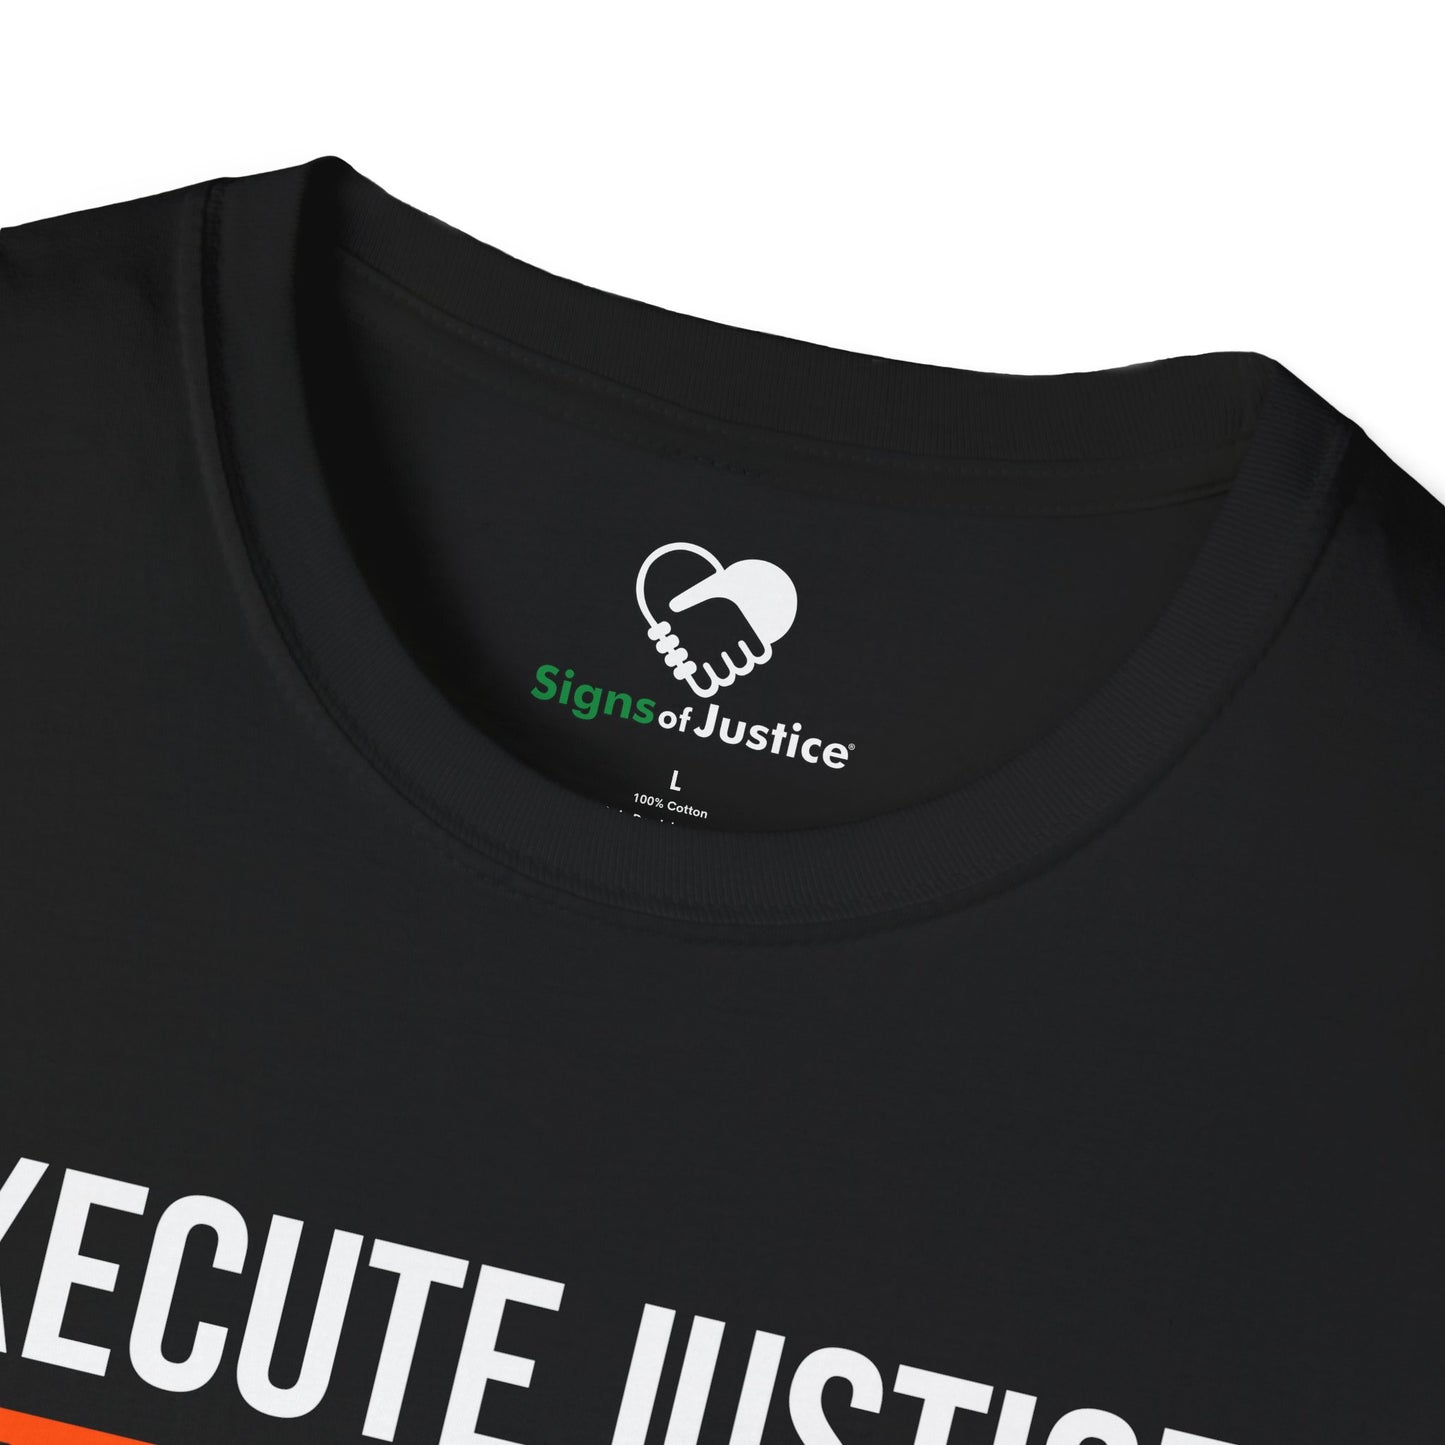 “Execute Justice” Unisex T-Shirt